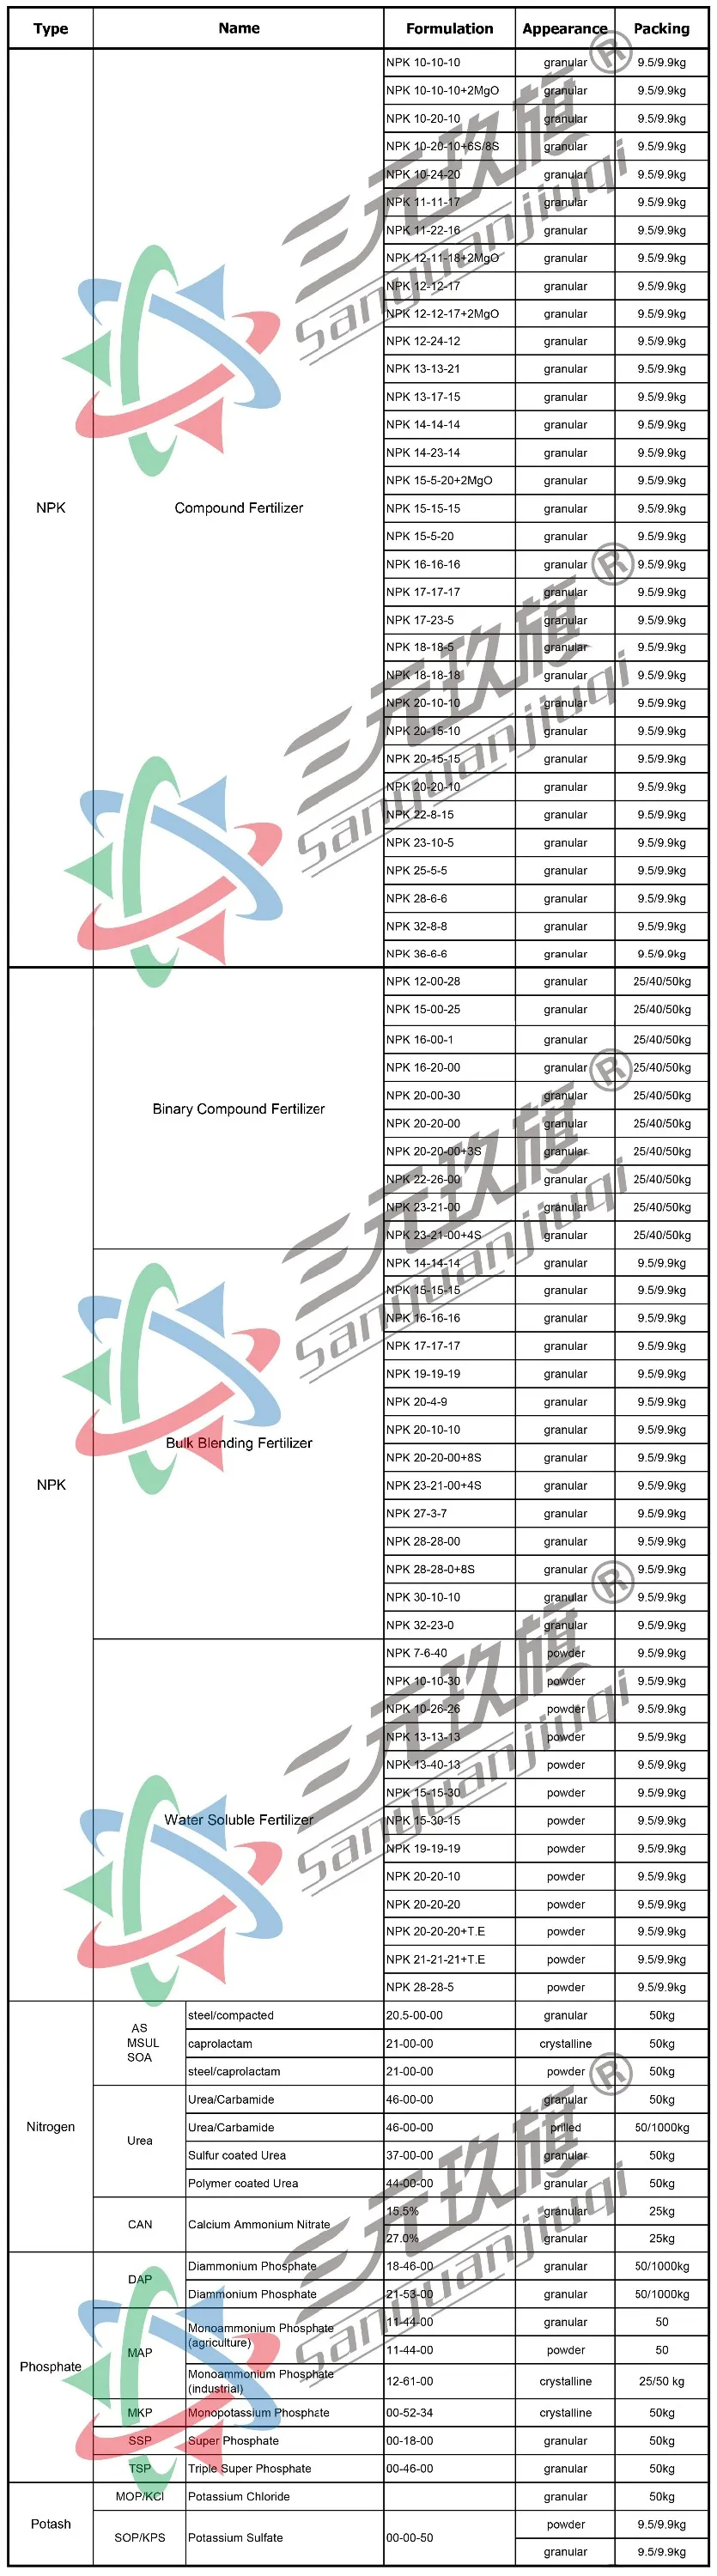 100% Water Soluble Powder NPK 20-20-20 Agricultural Grade Fertilizer Manufacturer from China